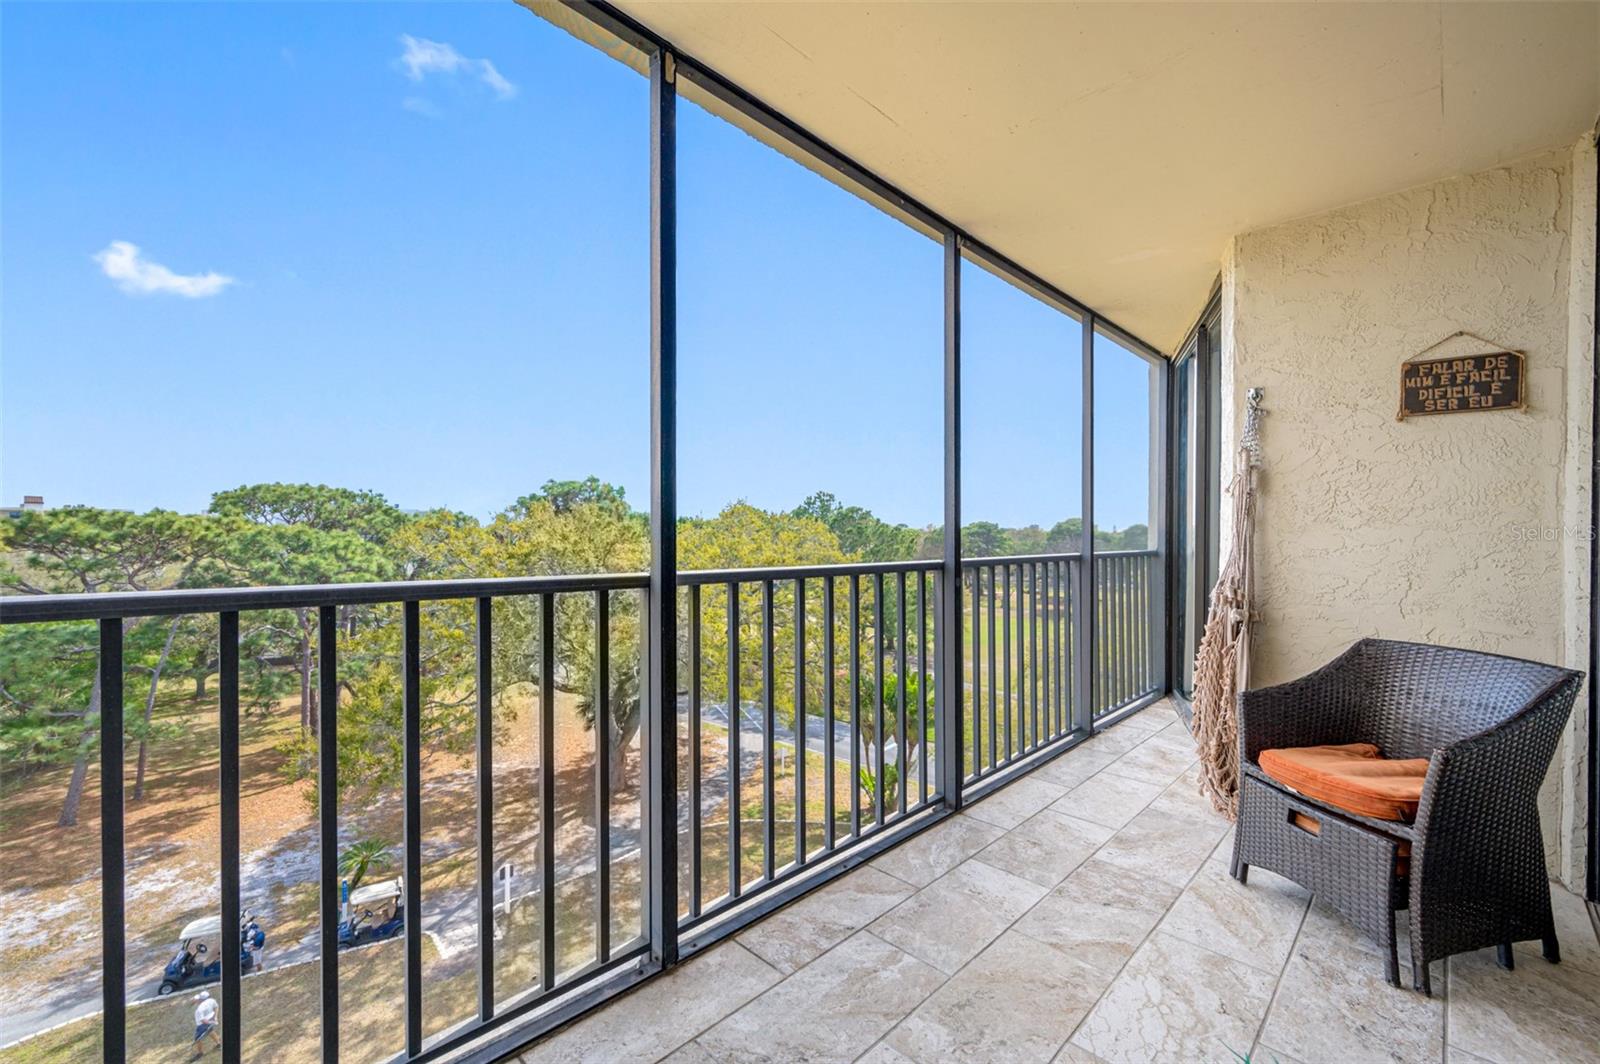 Lanai also has direct access from sliding doors of master bedroom. Great view overlooking the golf course.